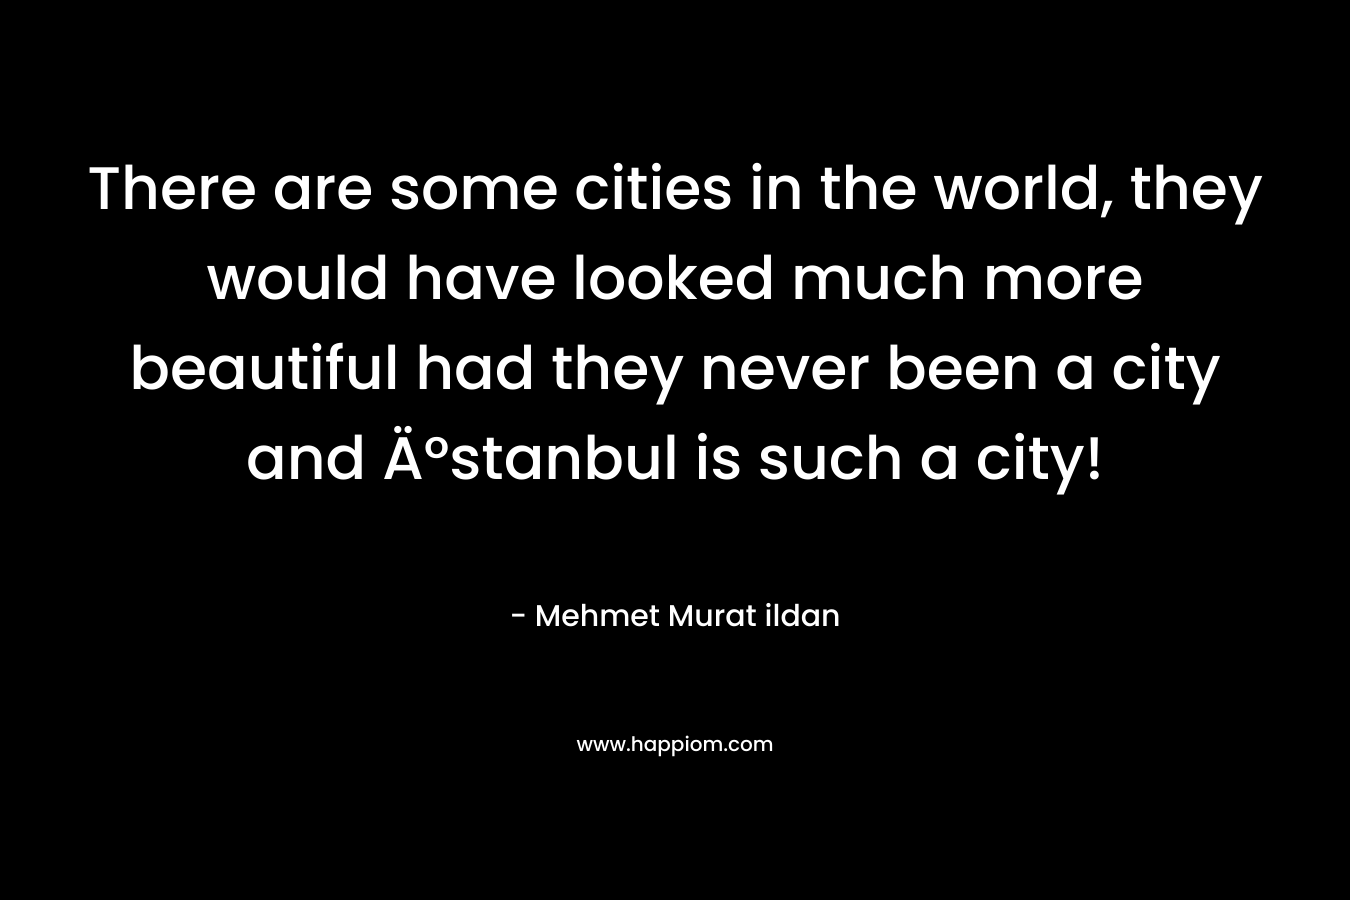 There are some cities in the world, they would have looked much more beautiful had they never been a city and Ä°stanbul is such a city!